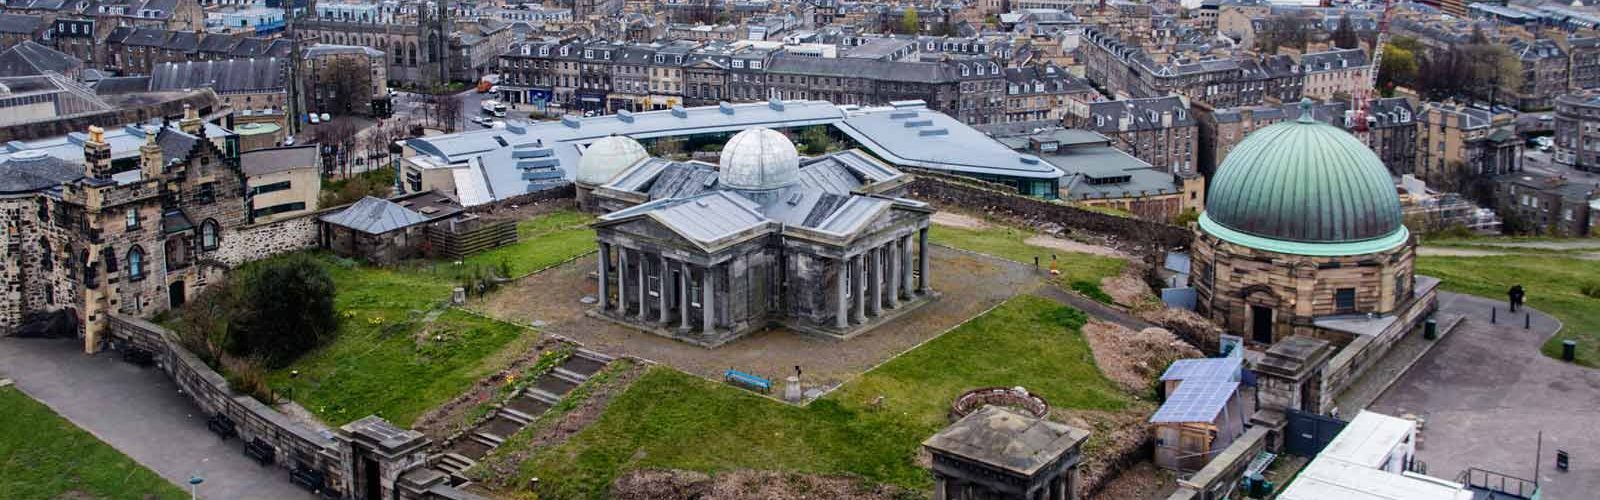 Aerial view of Old Observatory on Calton Hill